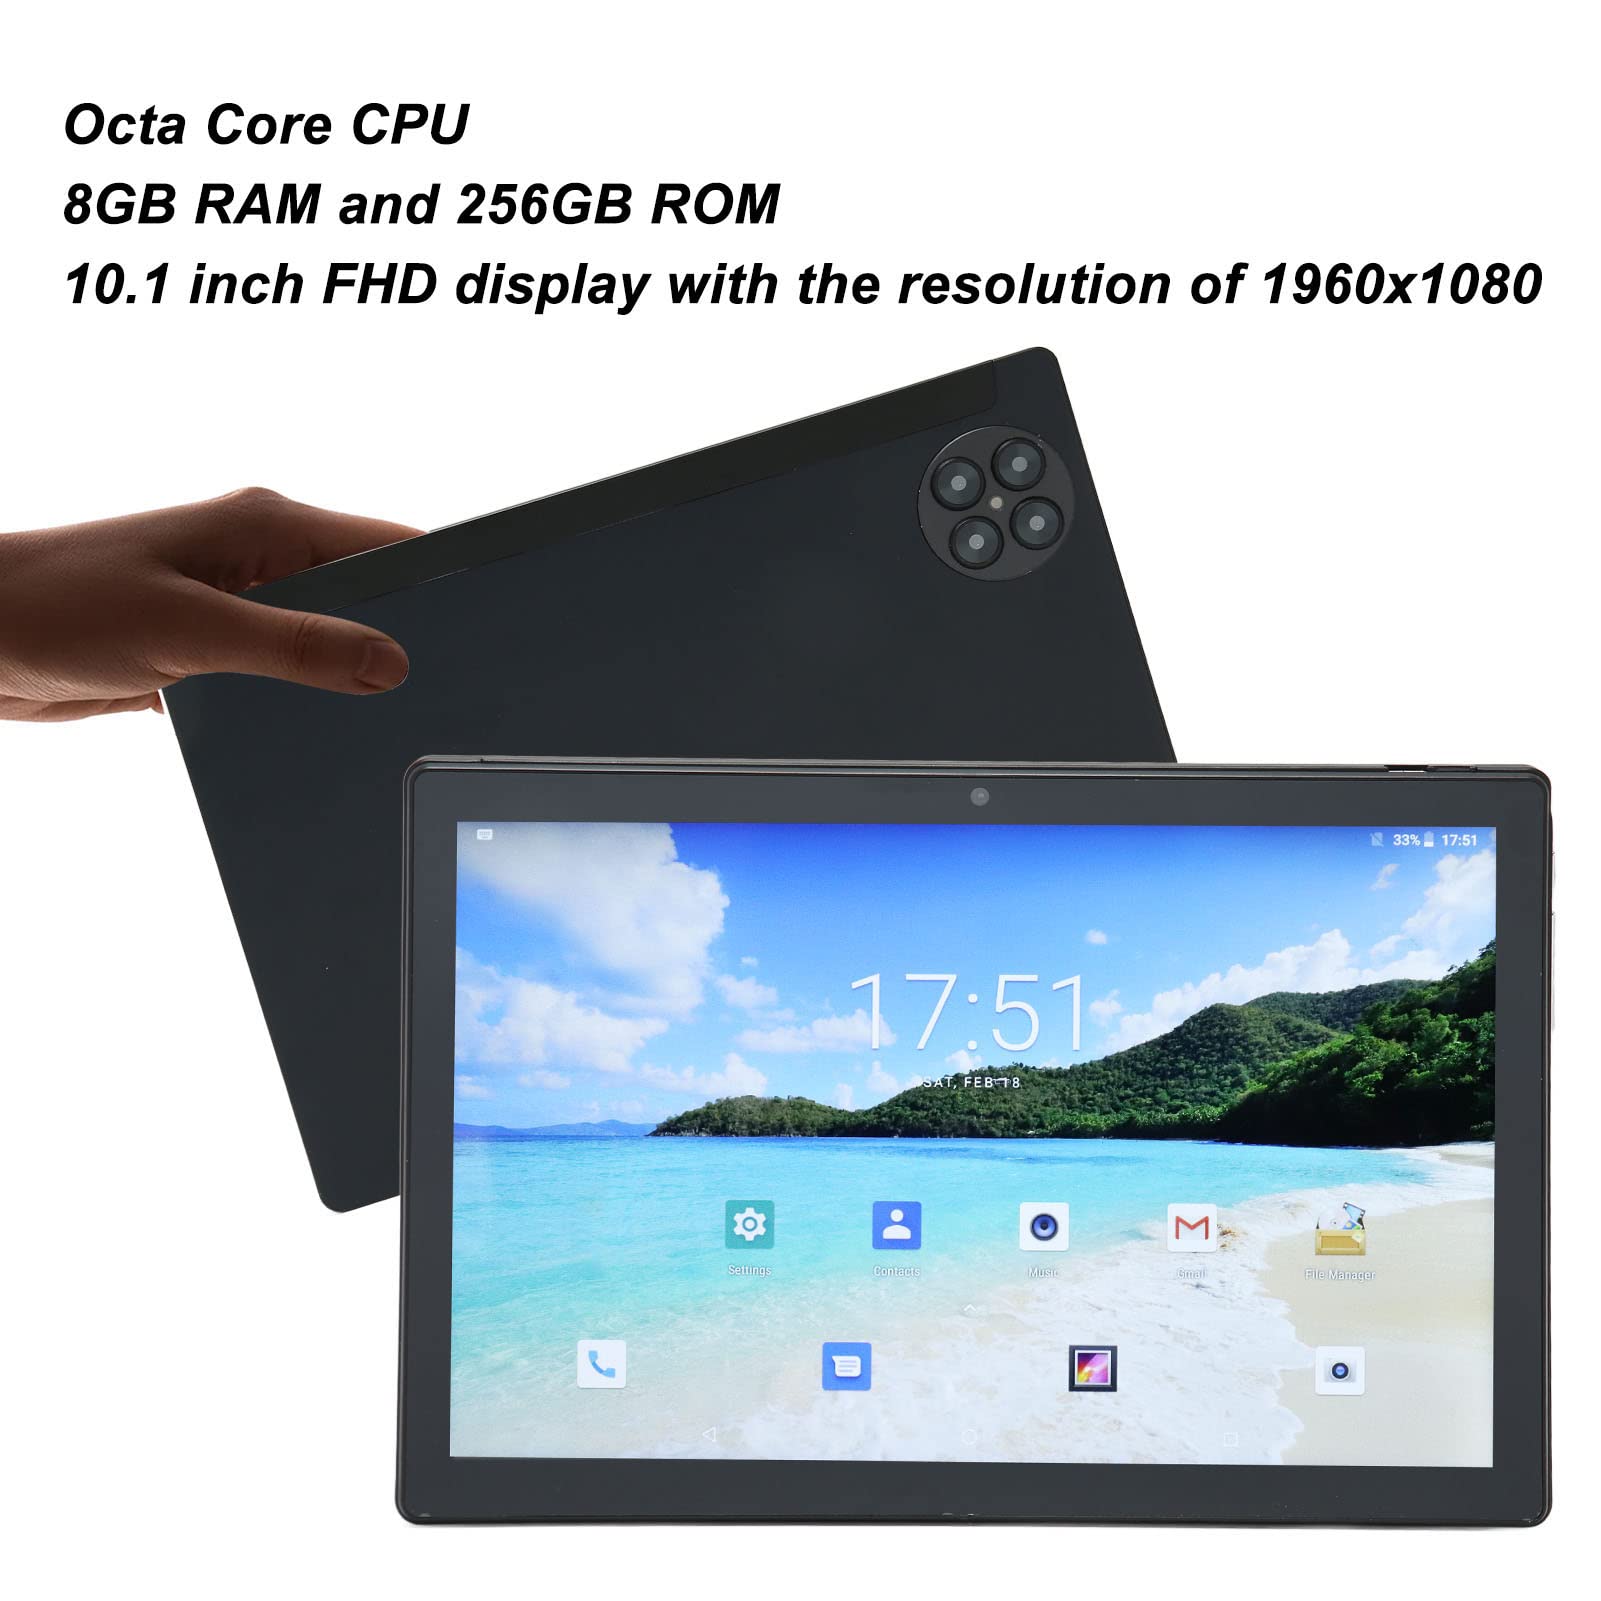 GOWENIC Android 12 Tablet, 10.1 Inch 1080P FHD Tablet with 8GB RAM and 256GB ROM 8MP Front and 16MP Rear 7000mAh Battery 4G LTE 5G WiFi Gaming Tablet, Black